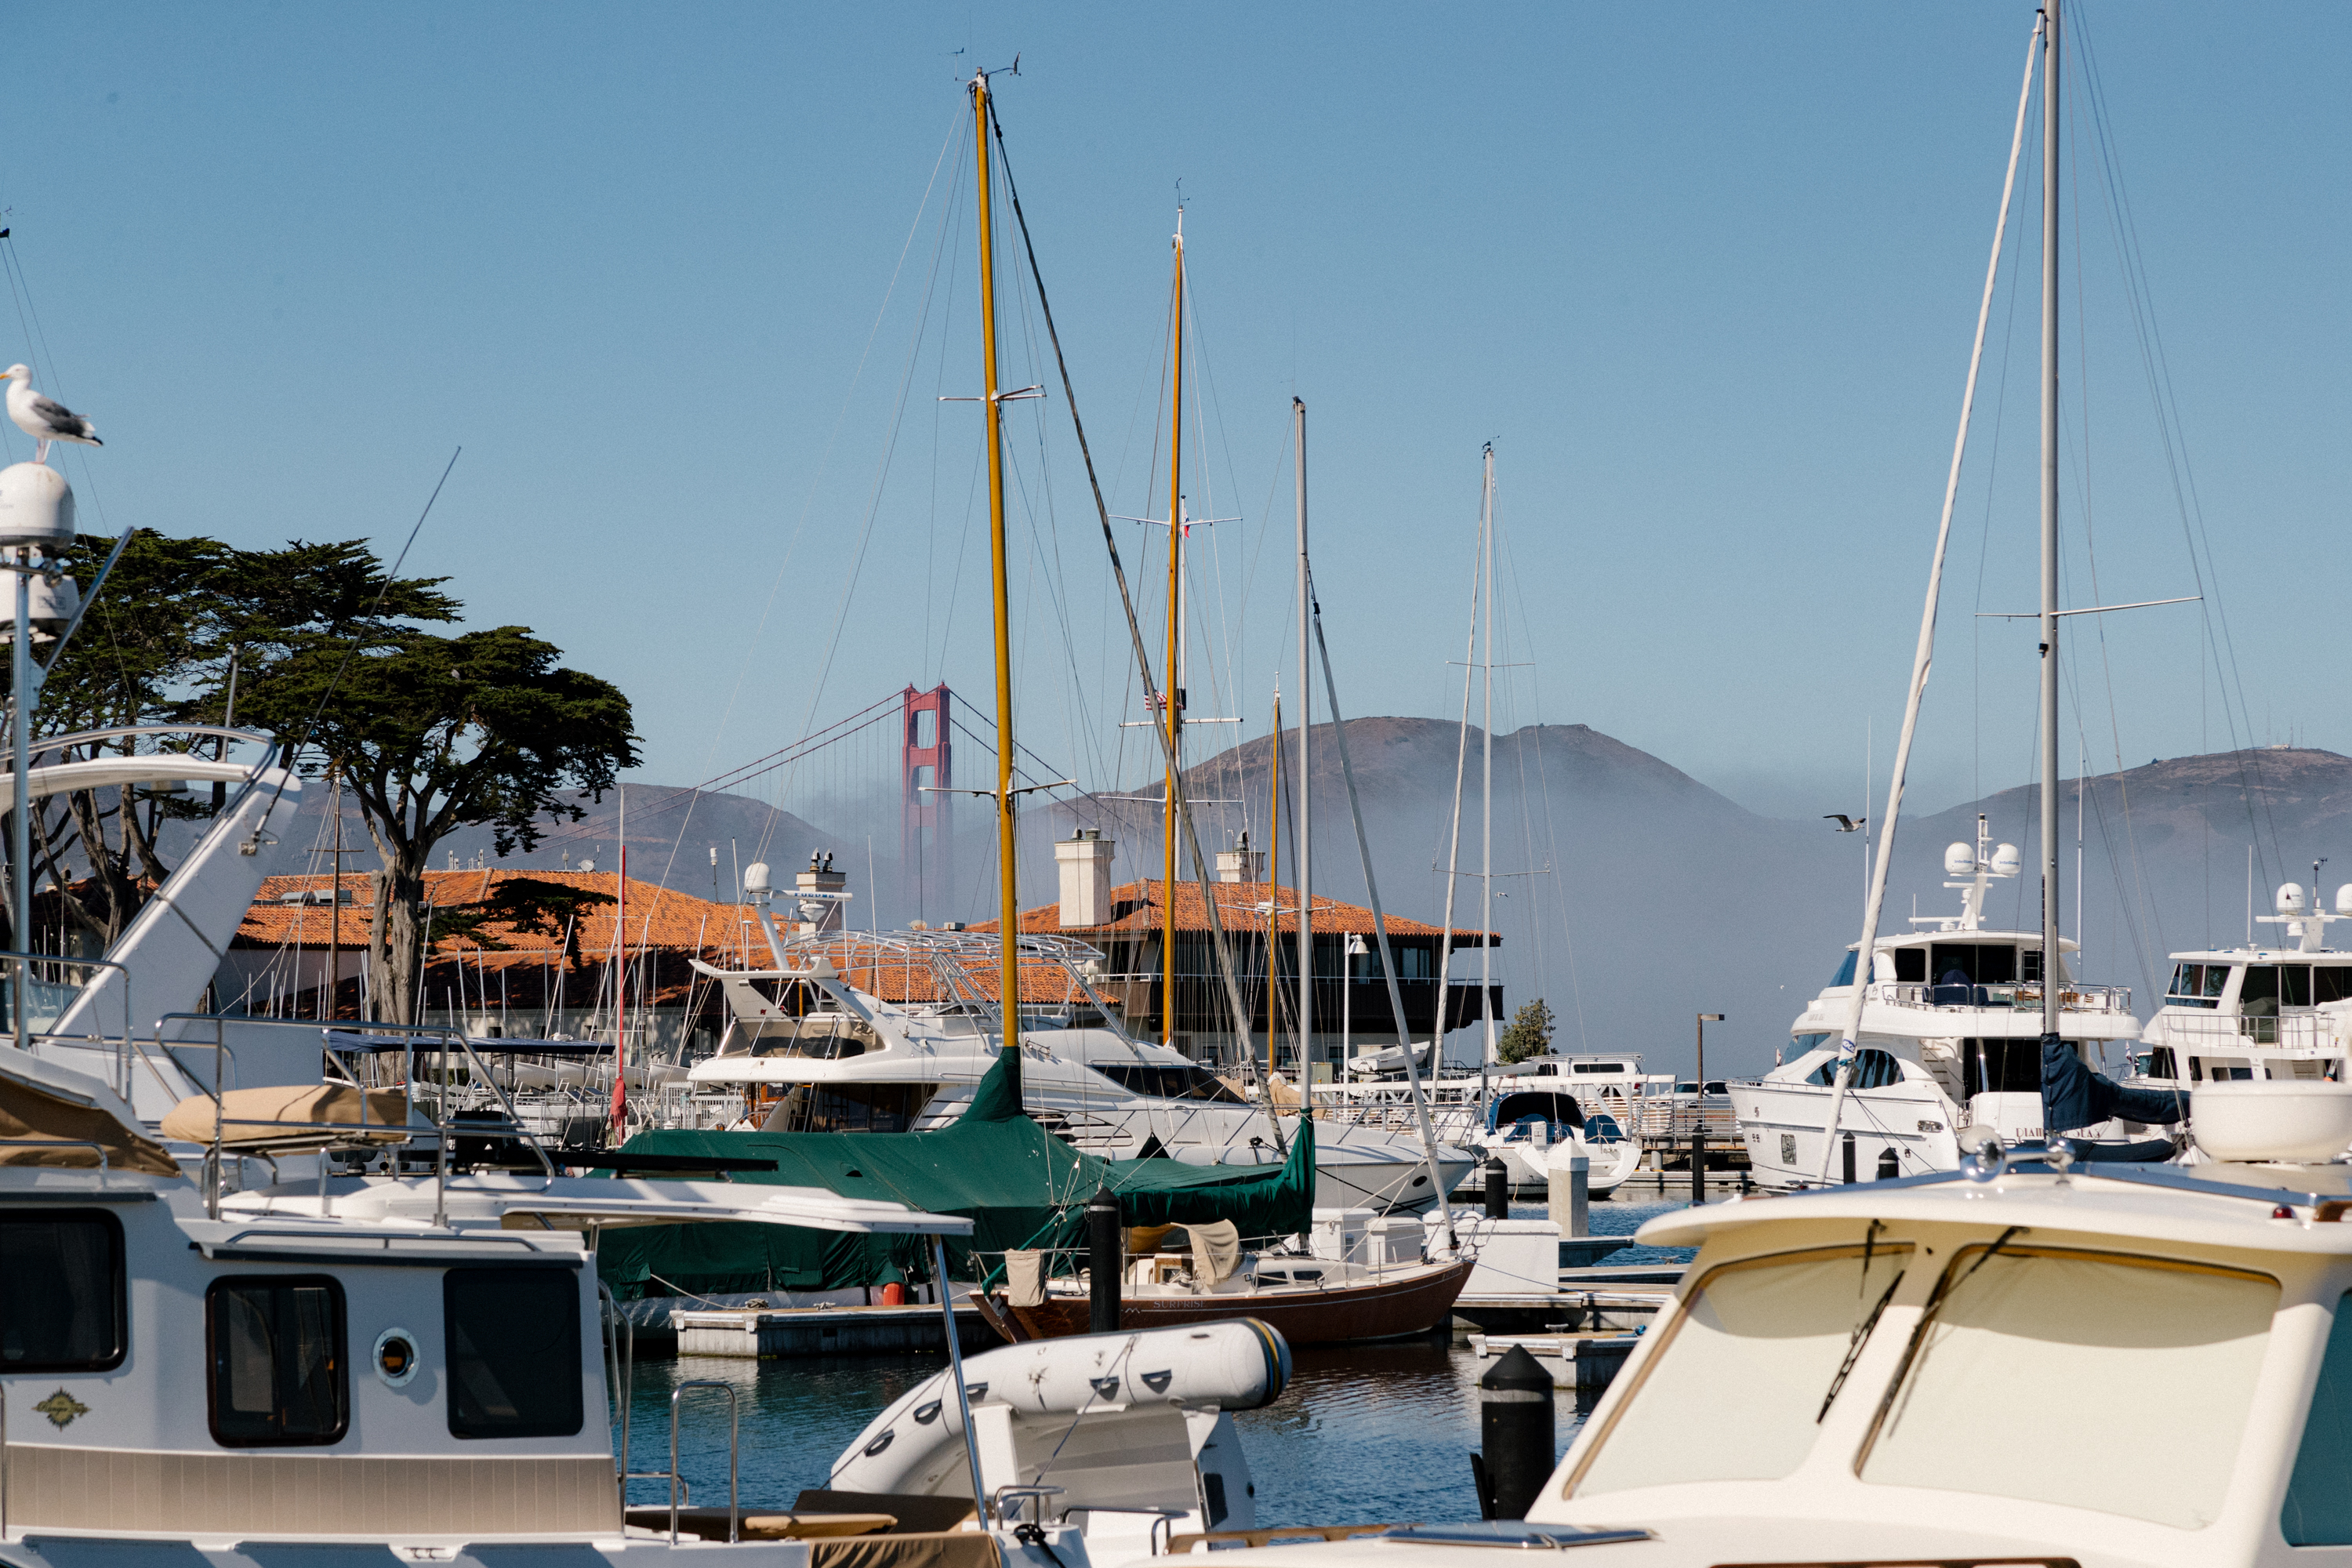 Marina with boats; Golden Gate Bridge in the distance under a clear sky.